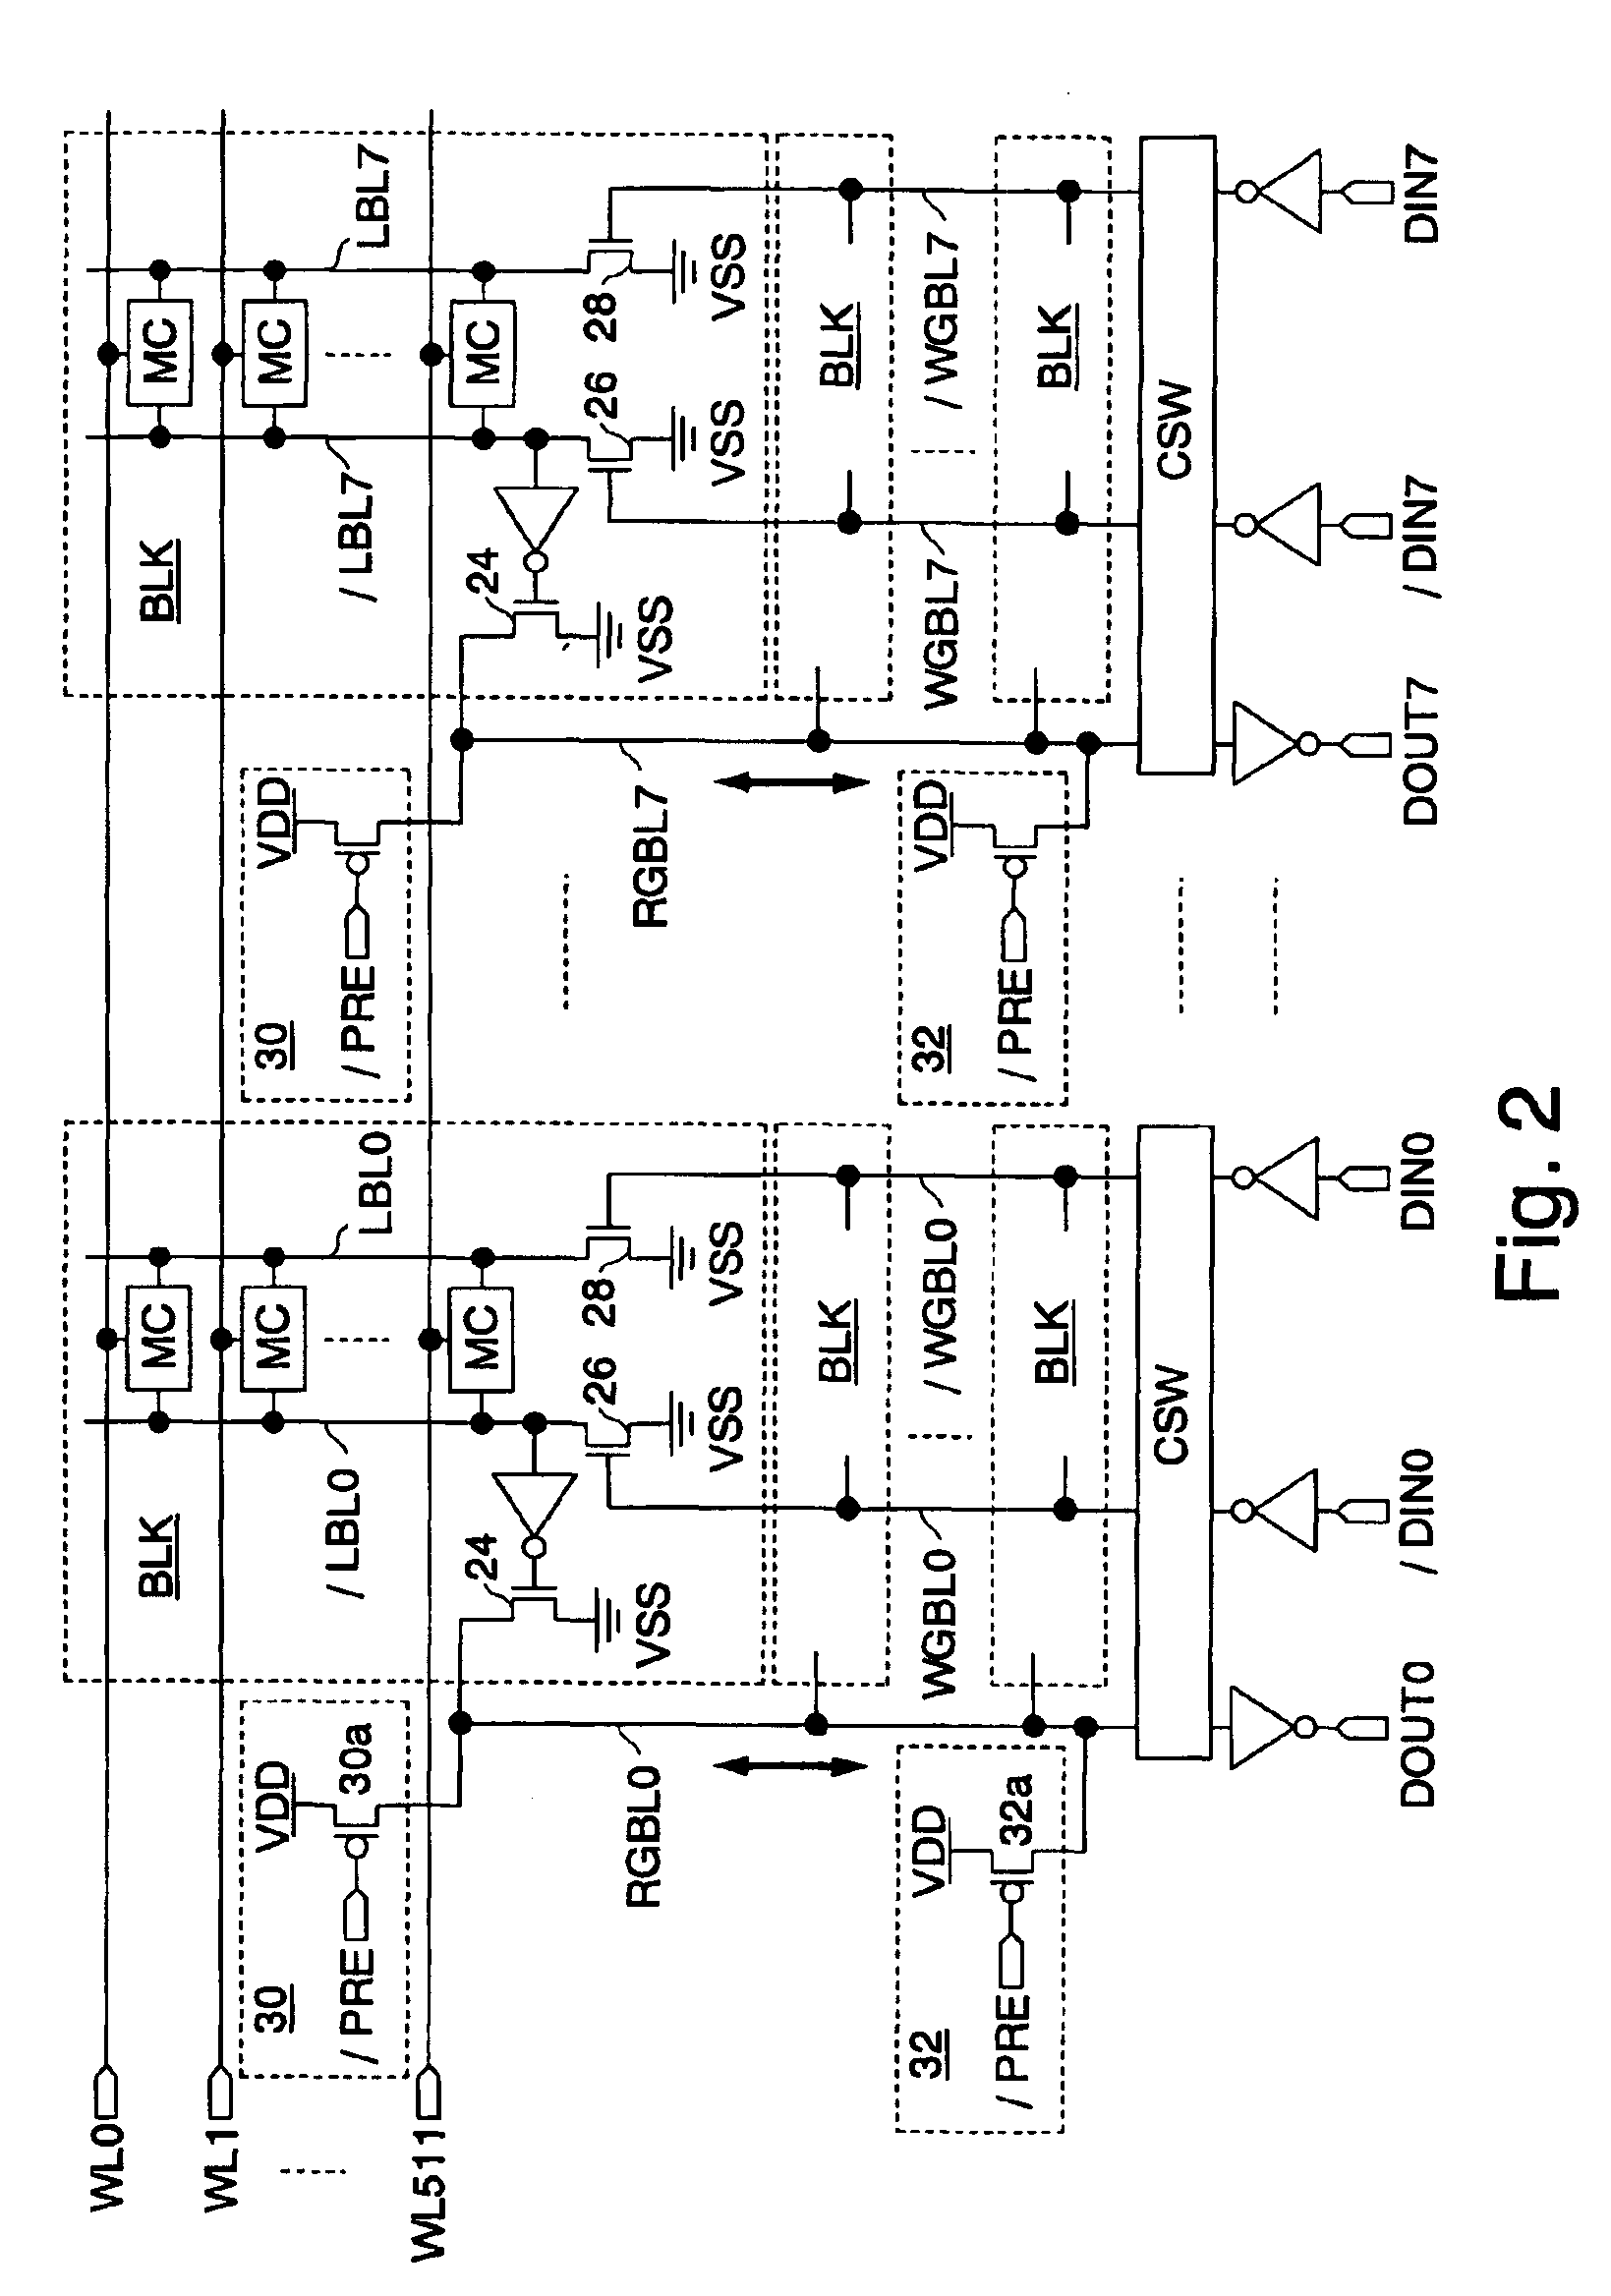 Semiconductor memory having hierarchical bit line structure